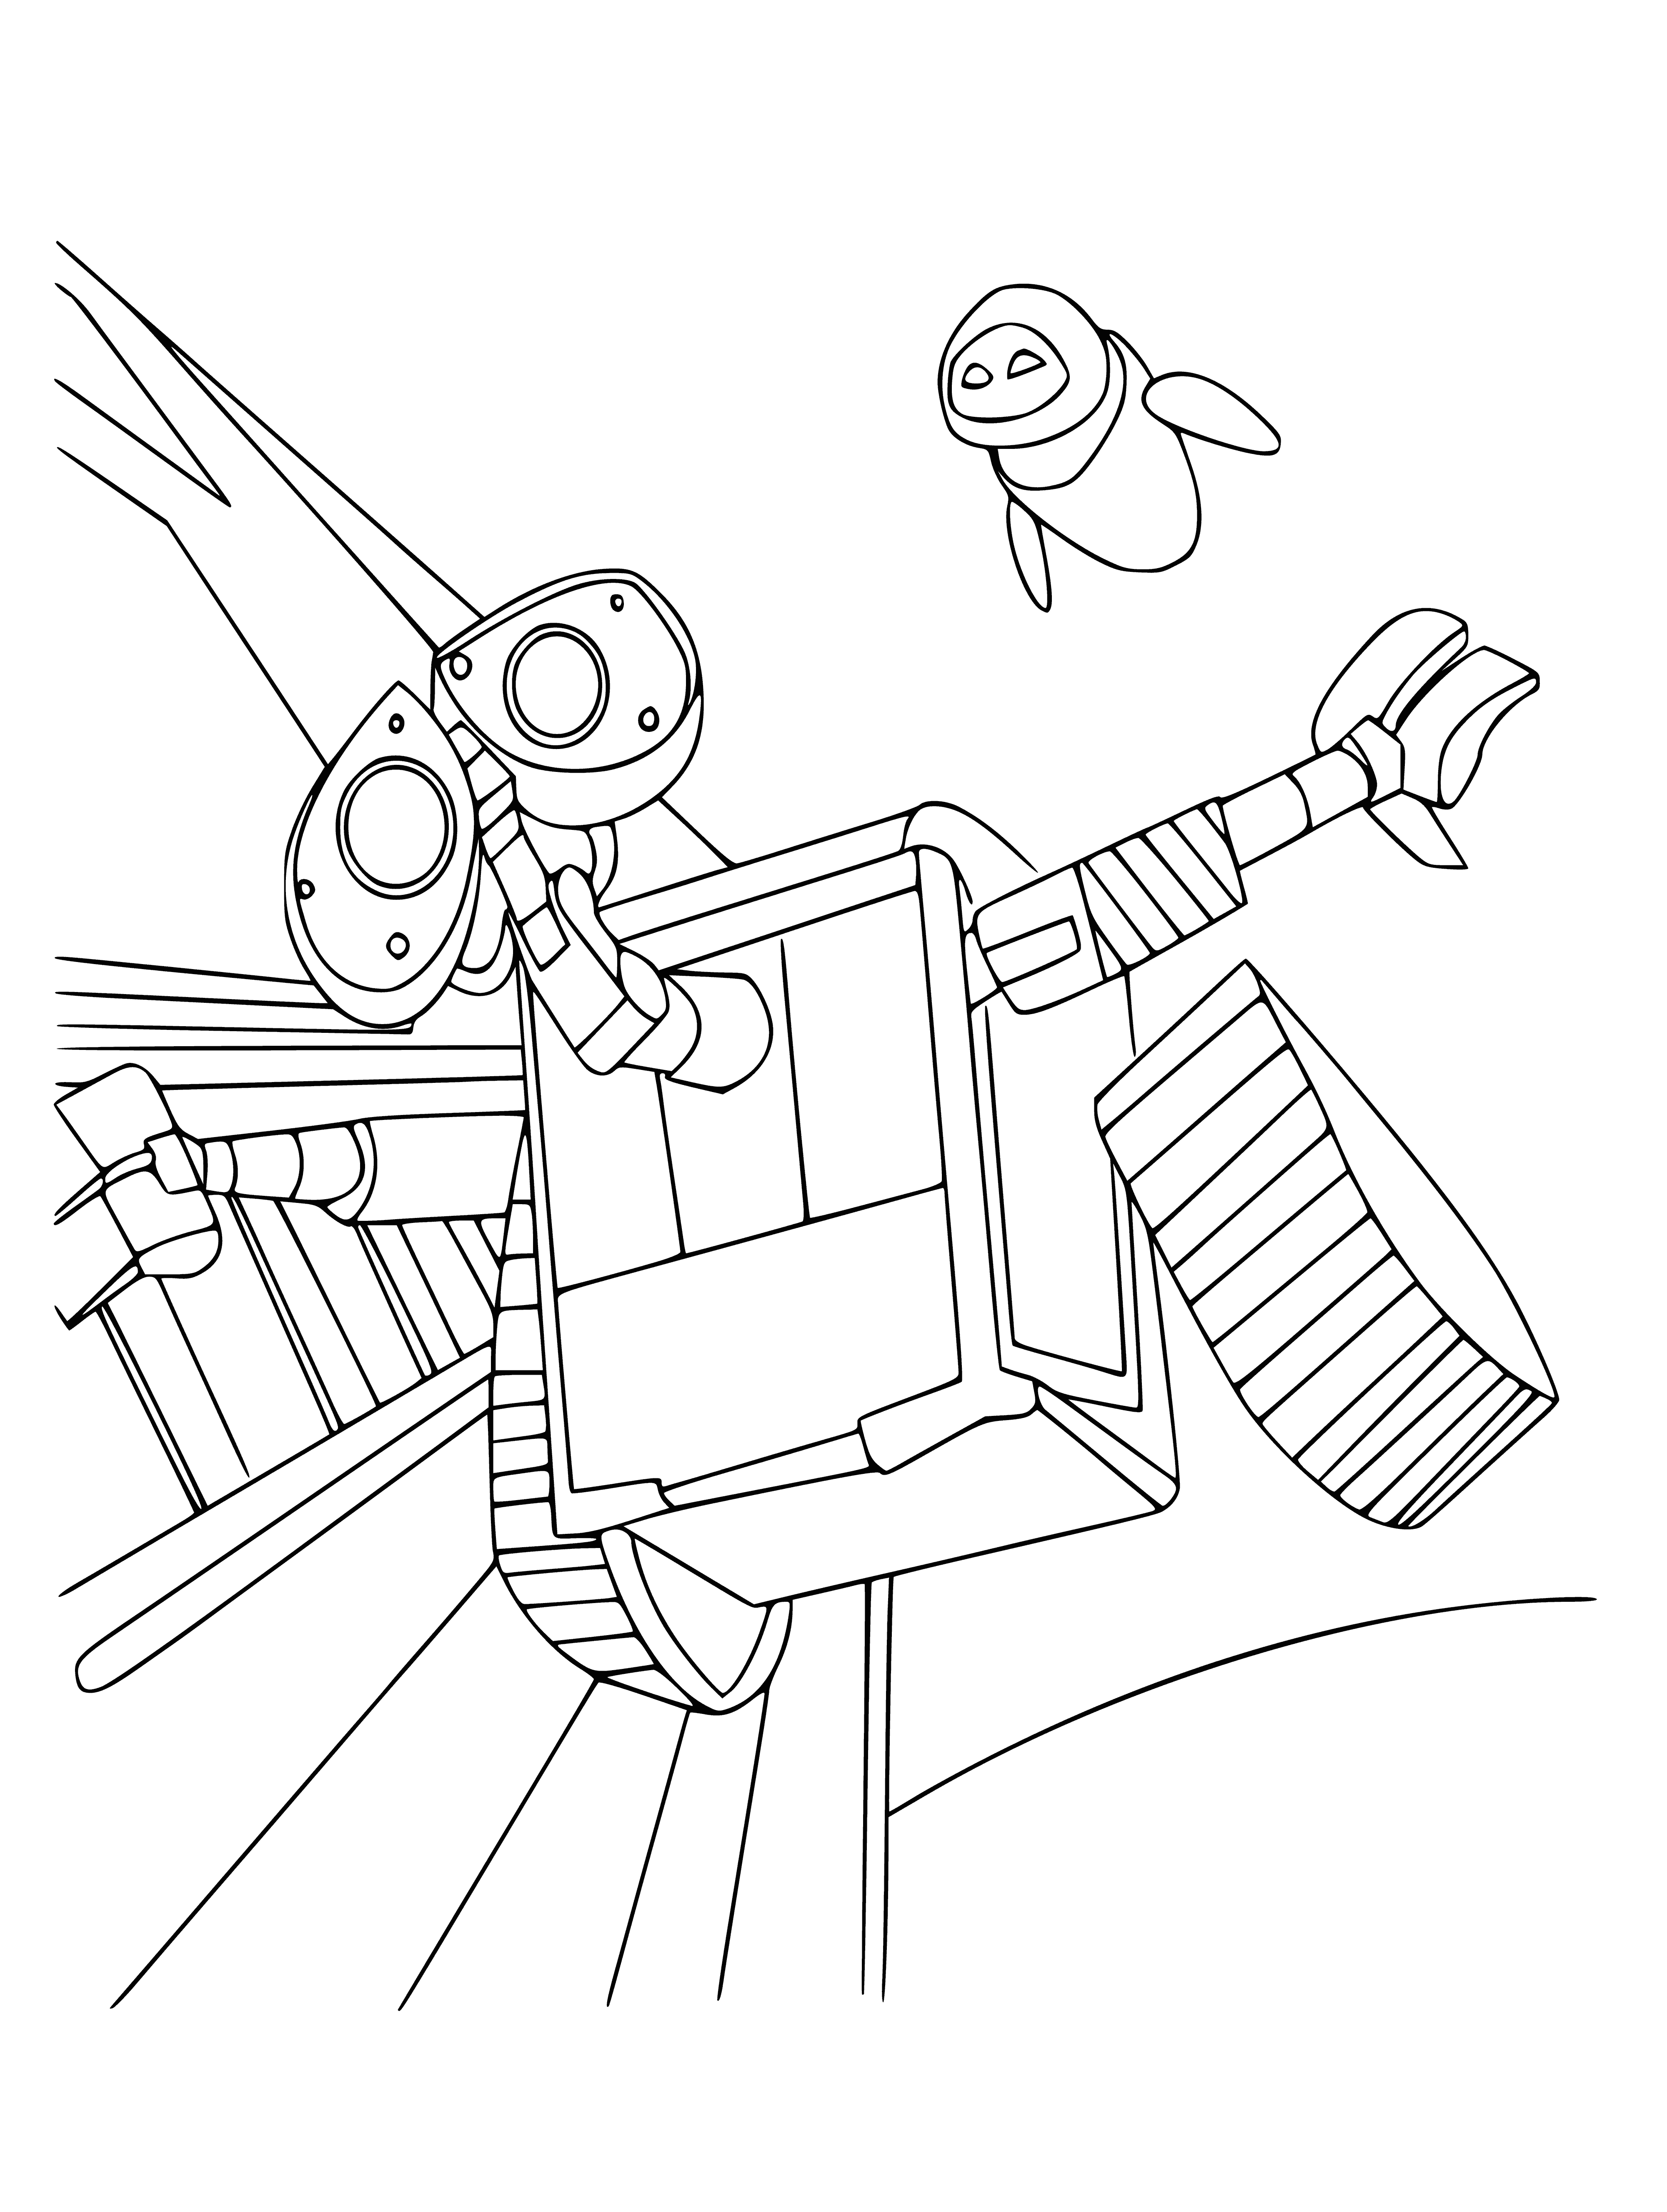 coloring page: A coloring page of Wall-e & Eve in a valley looking at each other, Wall-e with arms up & Eve arms down.